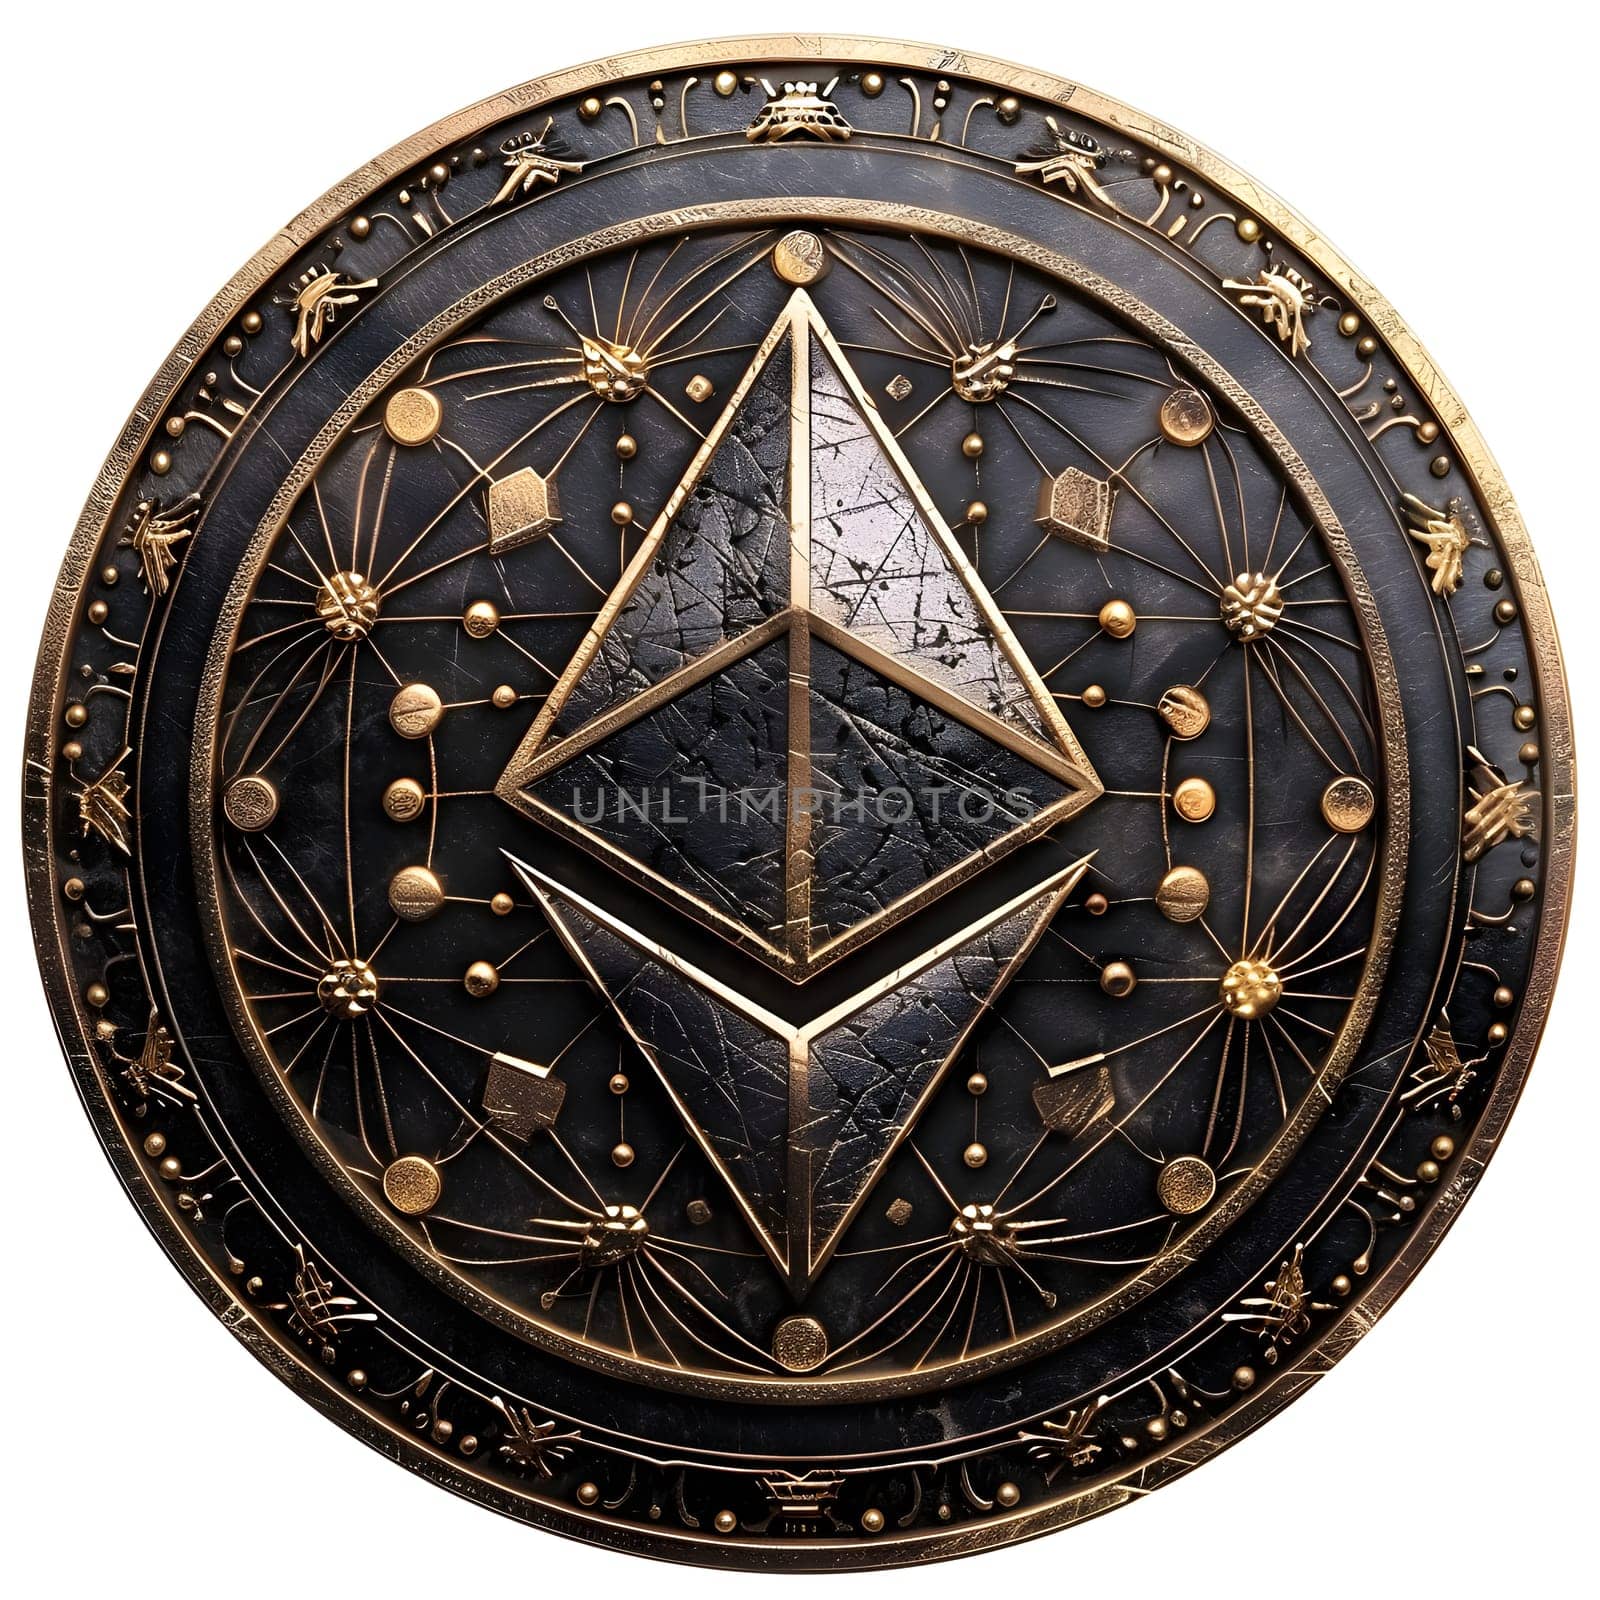 A sleek black and gold coin featuring a striking triangle symbol in the center by Nadtochiy